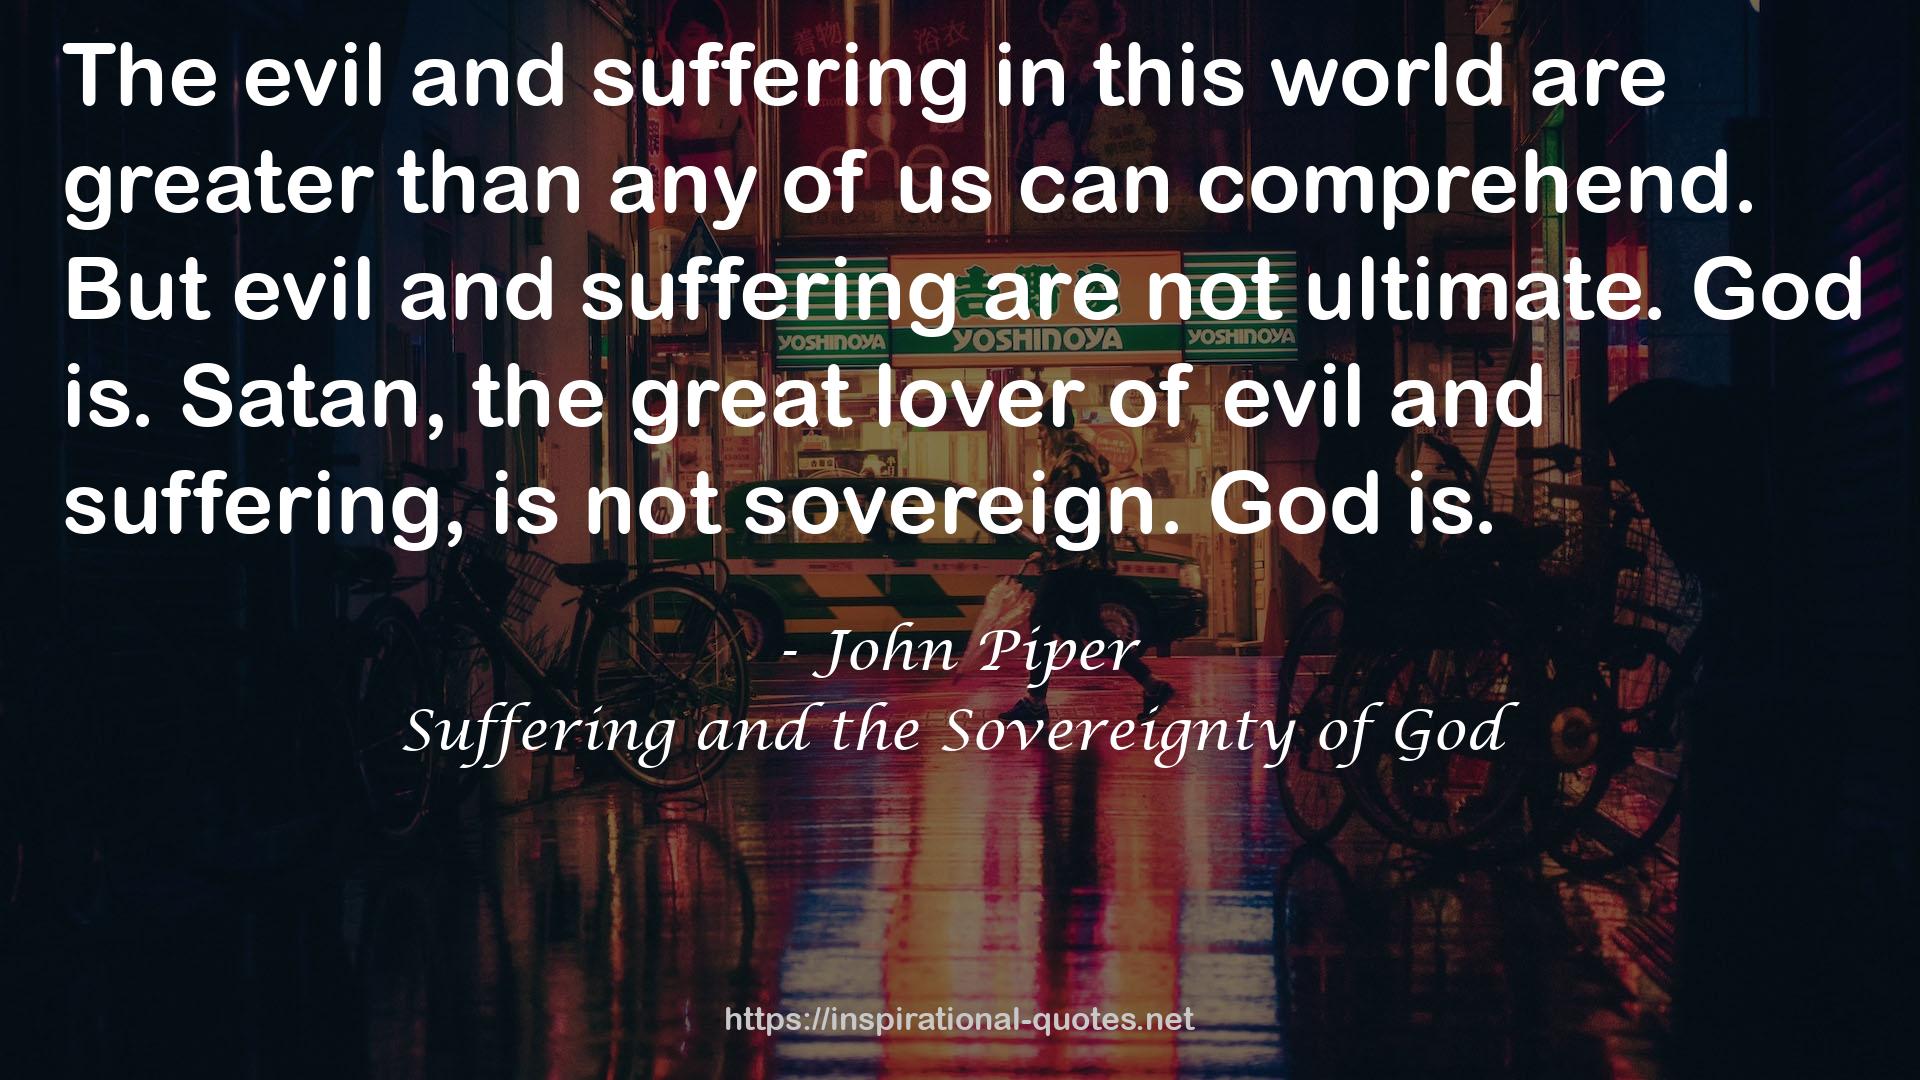 Suffering and the Sovereignty of God QUOTES